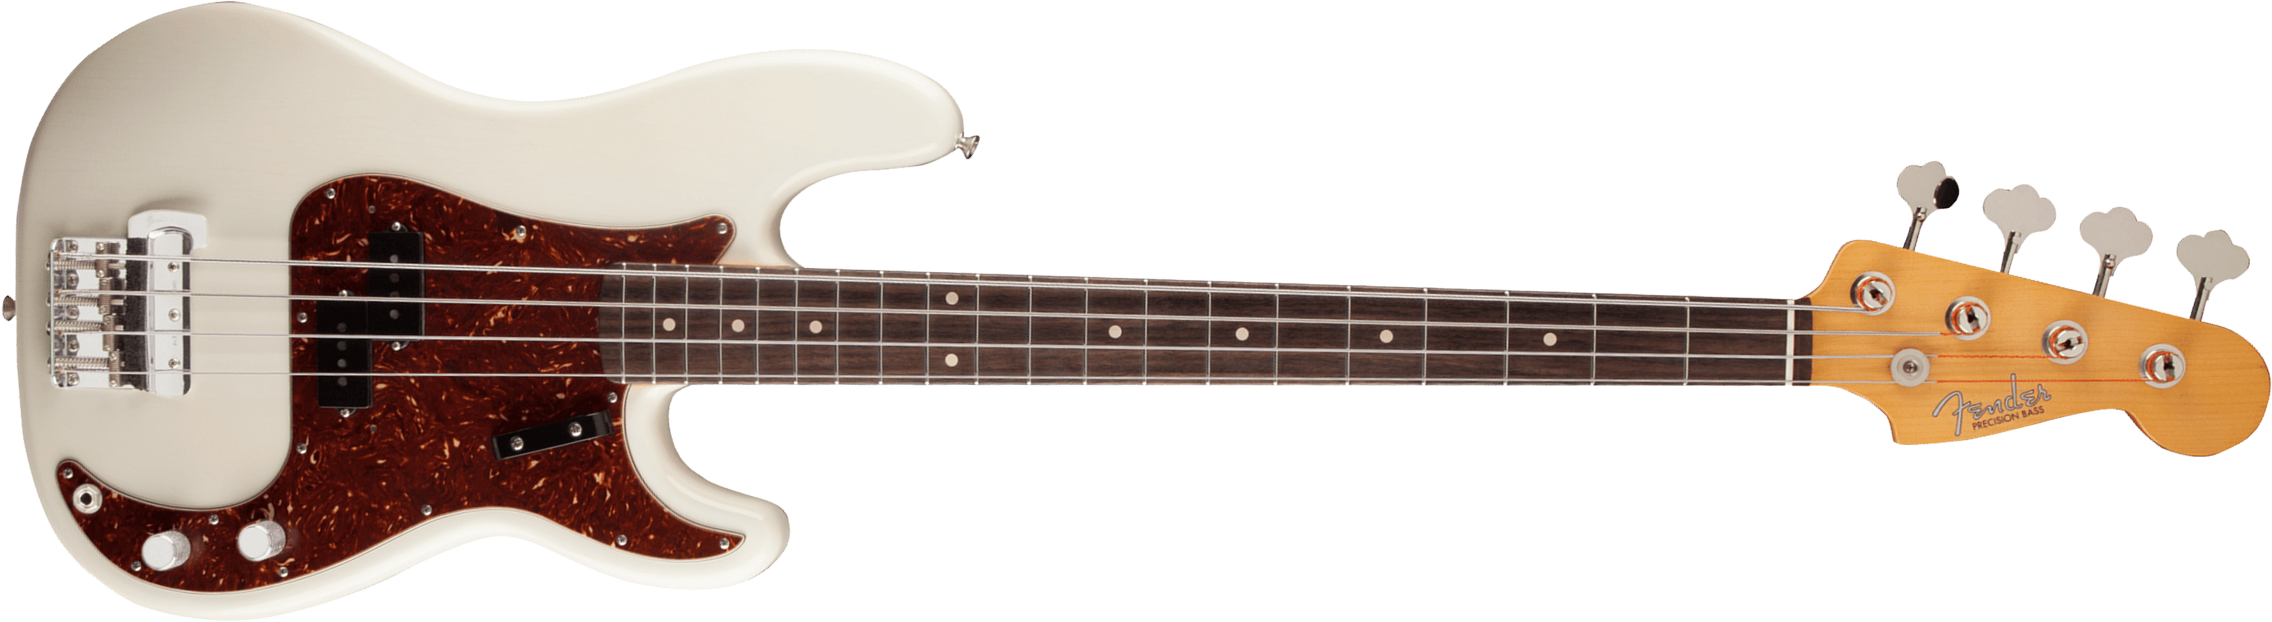 Fender Custom Shop Sean Hurley Precision Bass Signature Rw - Olympic White - Basse Électrique Solid Body - Main picture